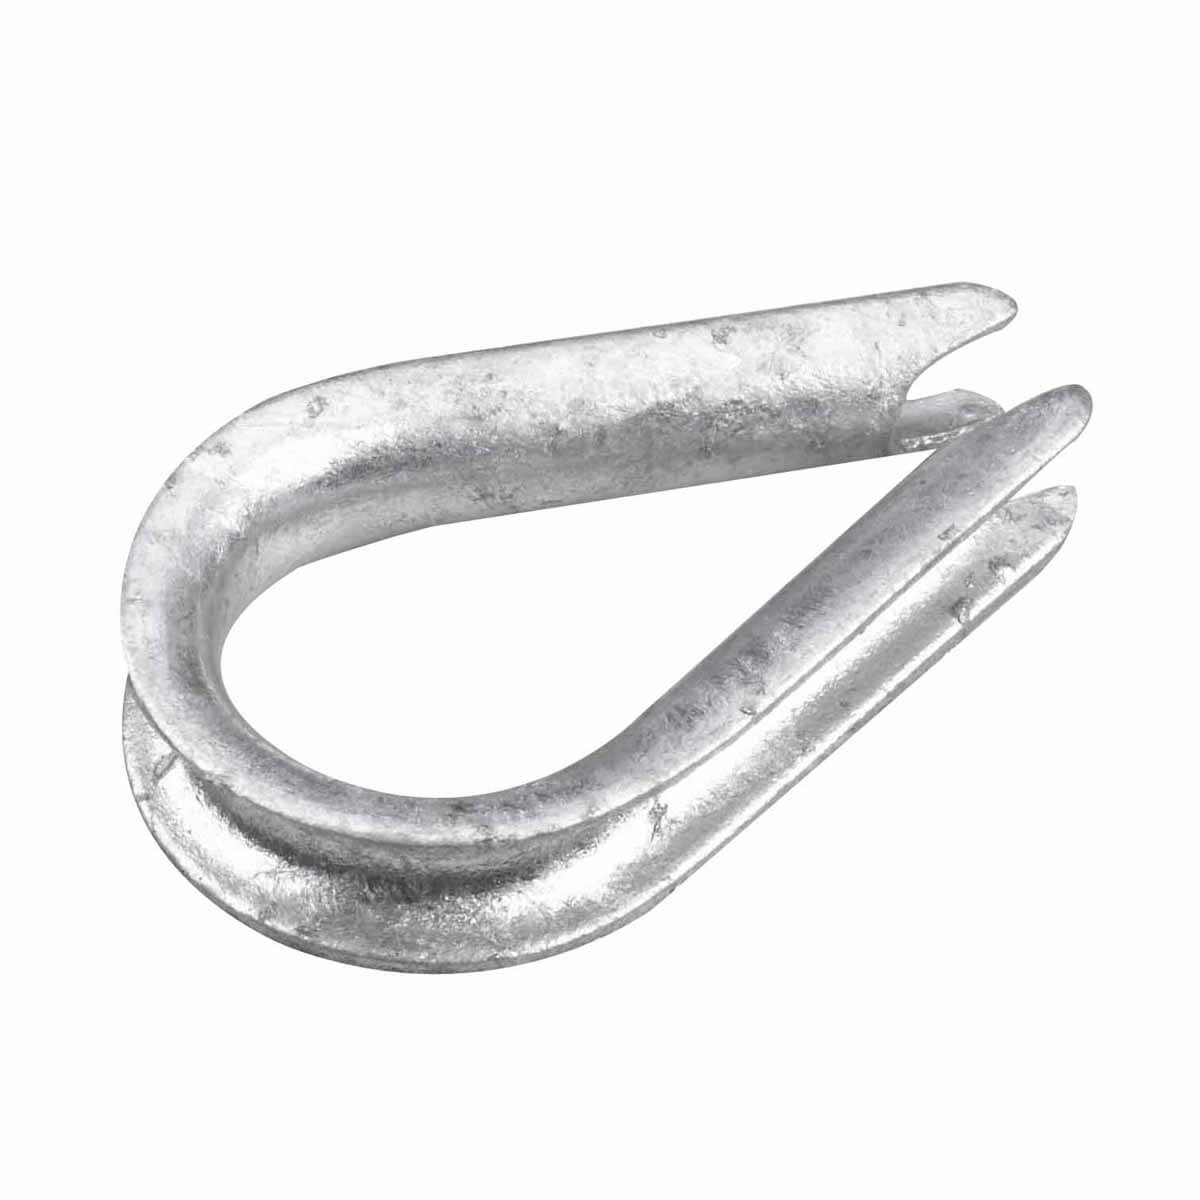 Rope Thimble - Zinc - 1/4-in